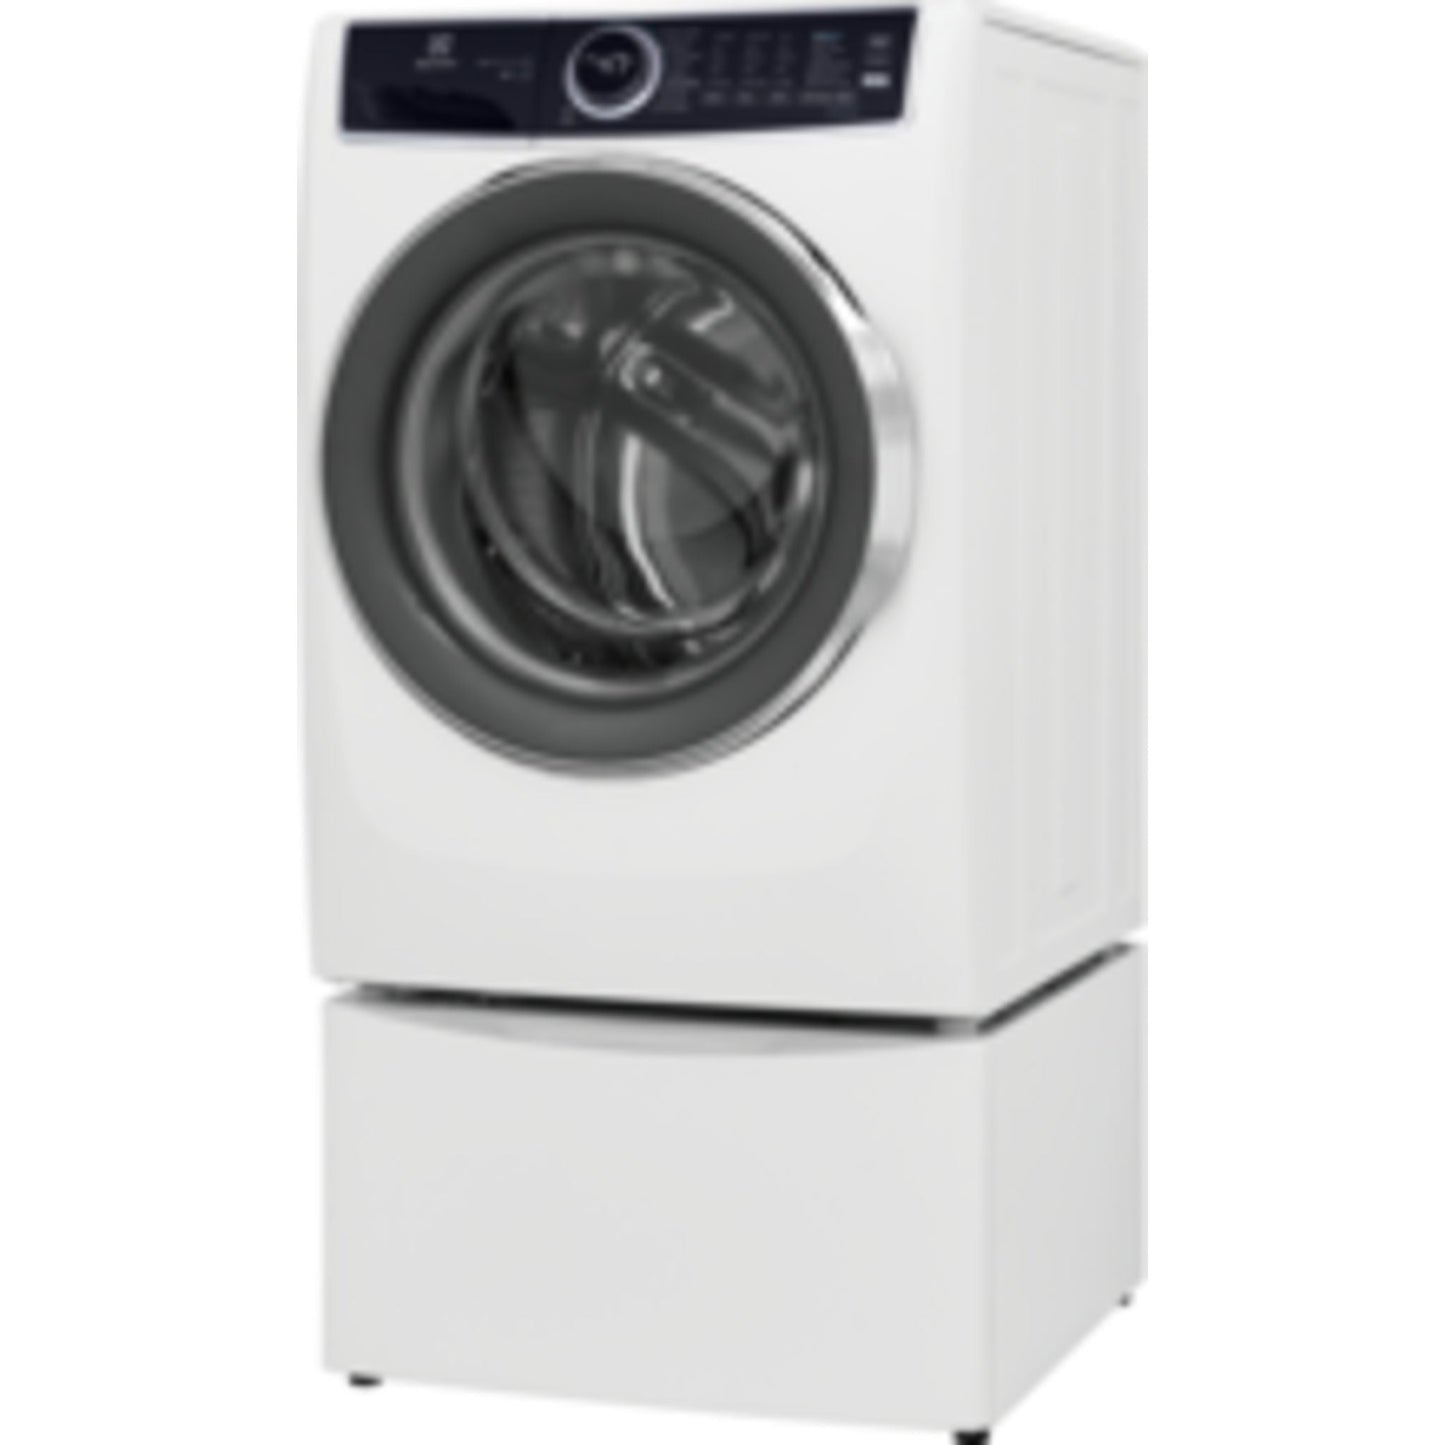 Electrolux Front Load Washer (ELFW7537AW) - White